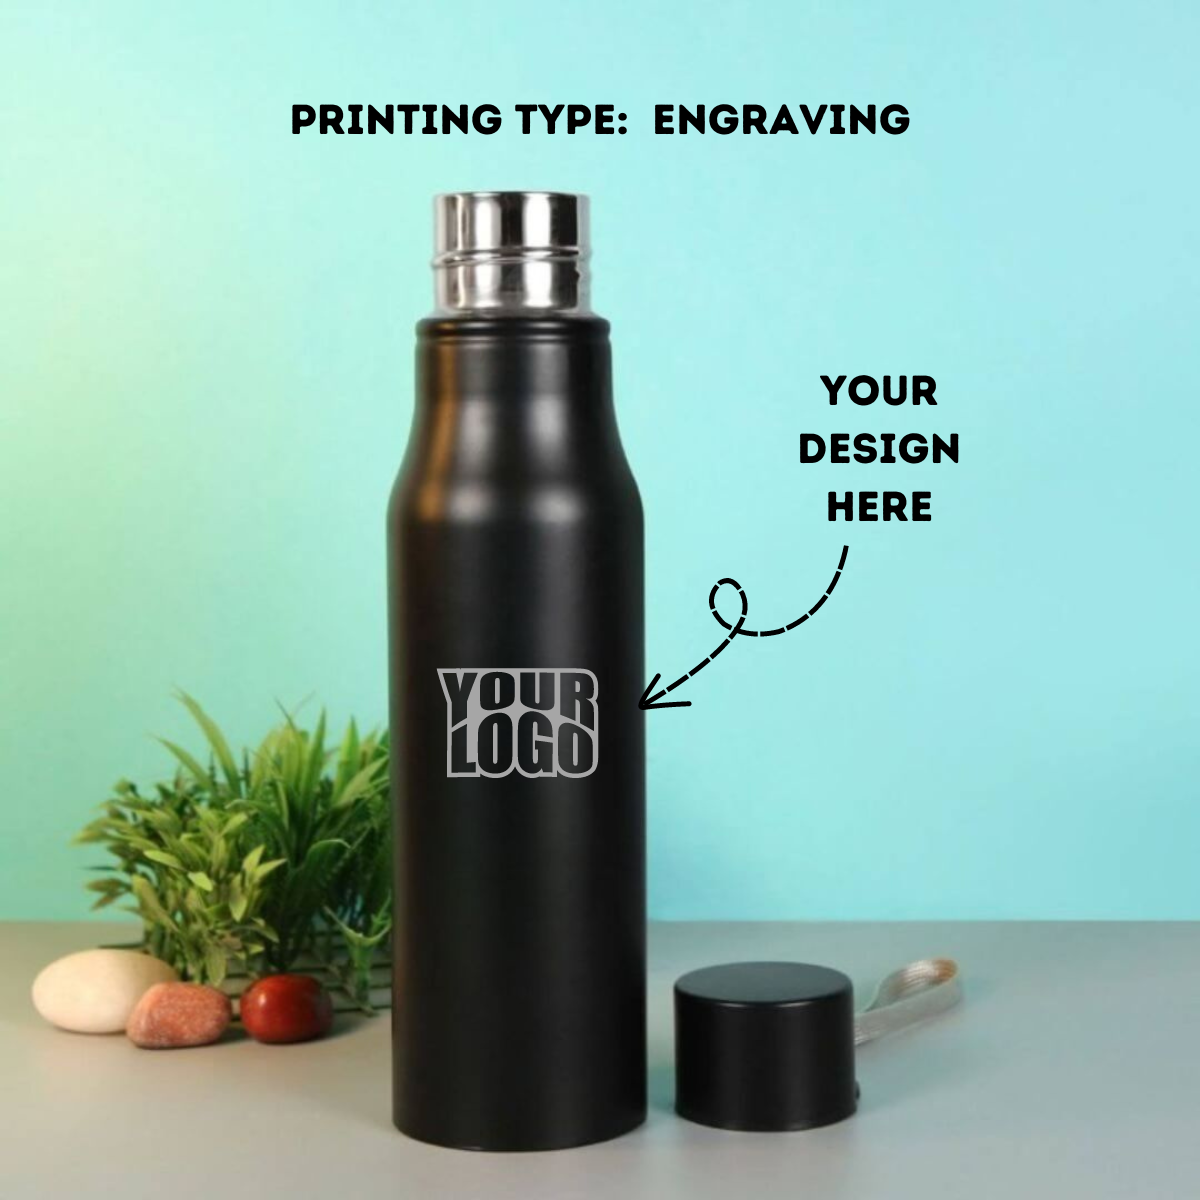 Personalized Premium Black Stainless Steel Water Bottle Laser Engraved - 750ml  - For Return Gift, Corporate Gifting, Office or Personal Use